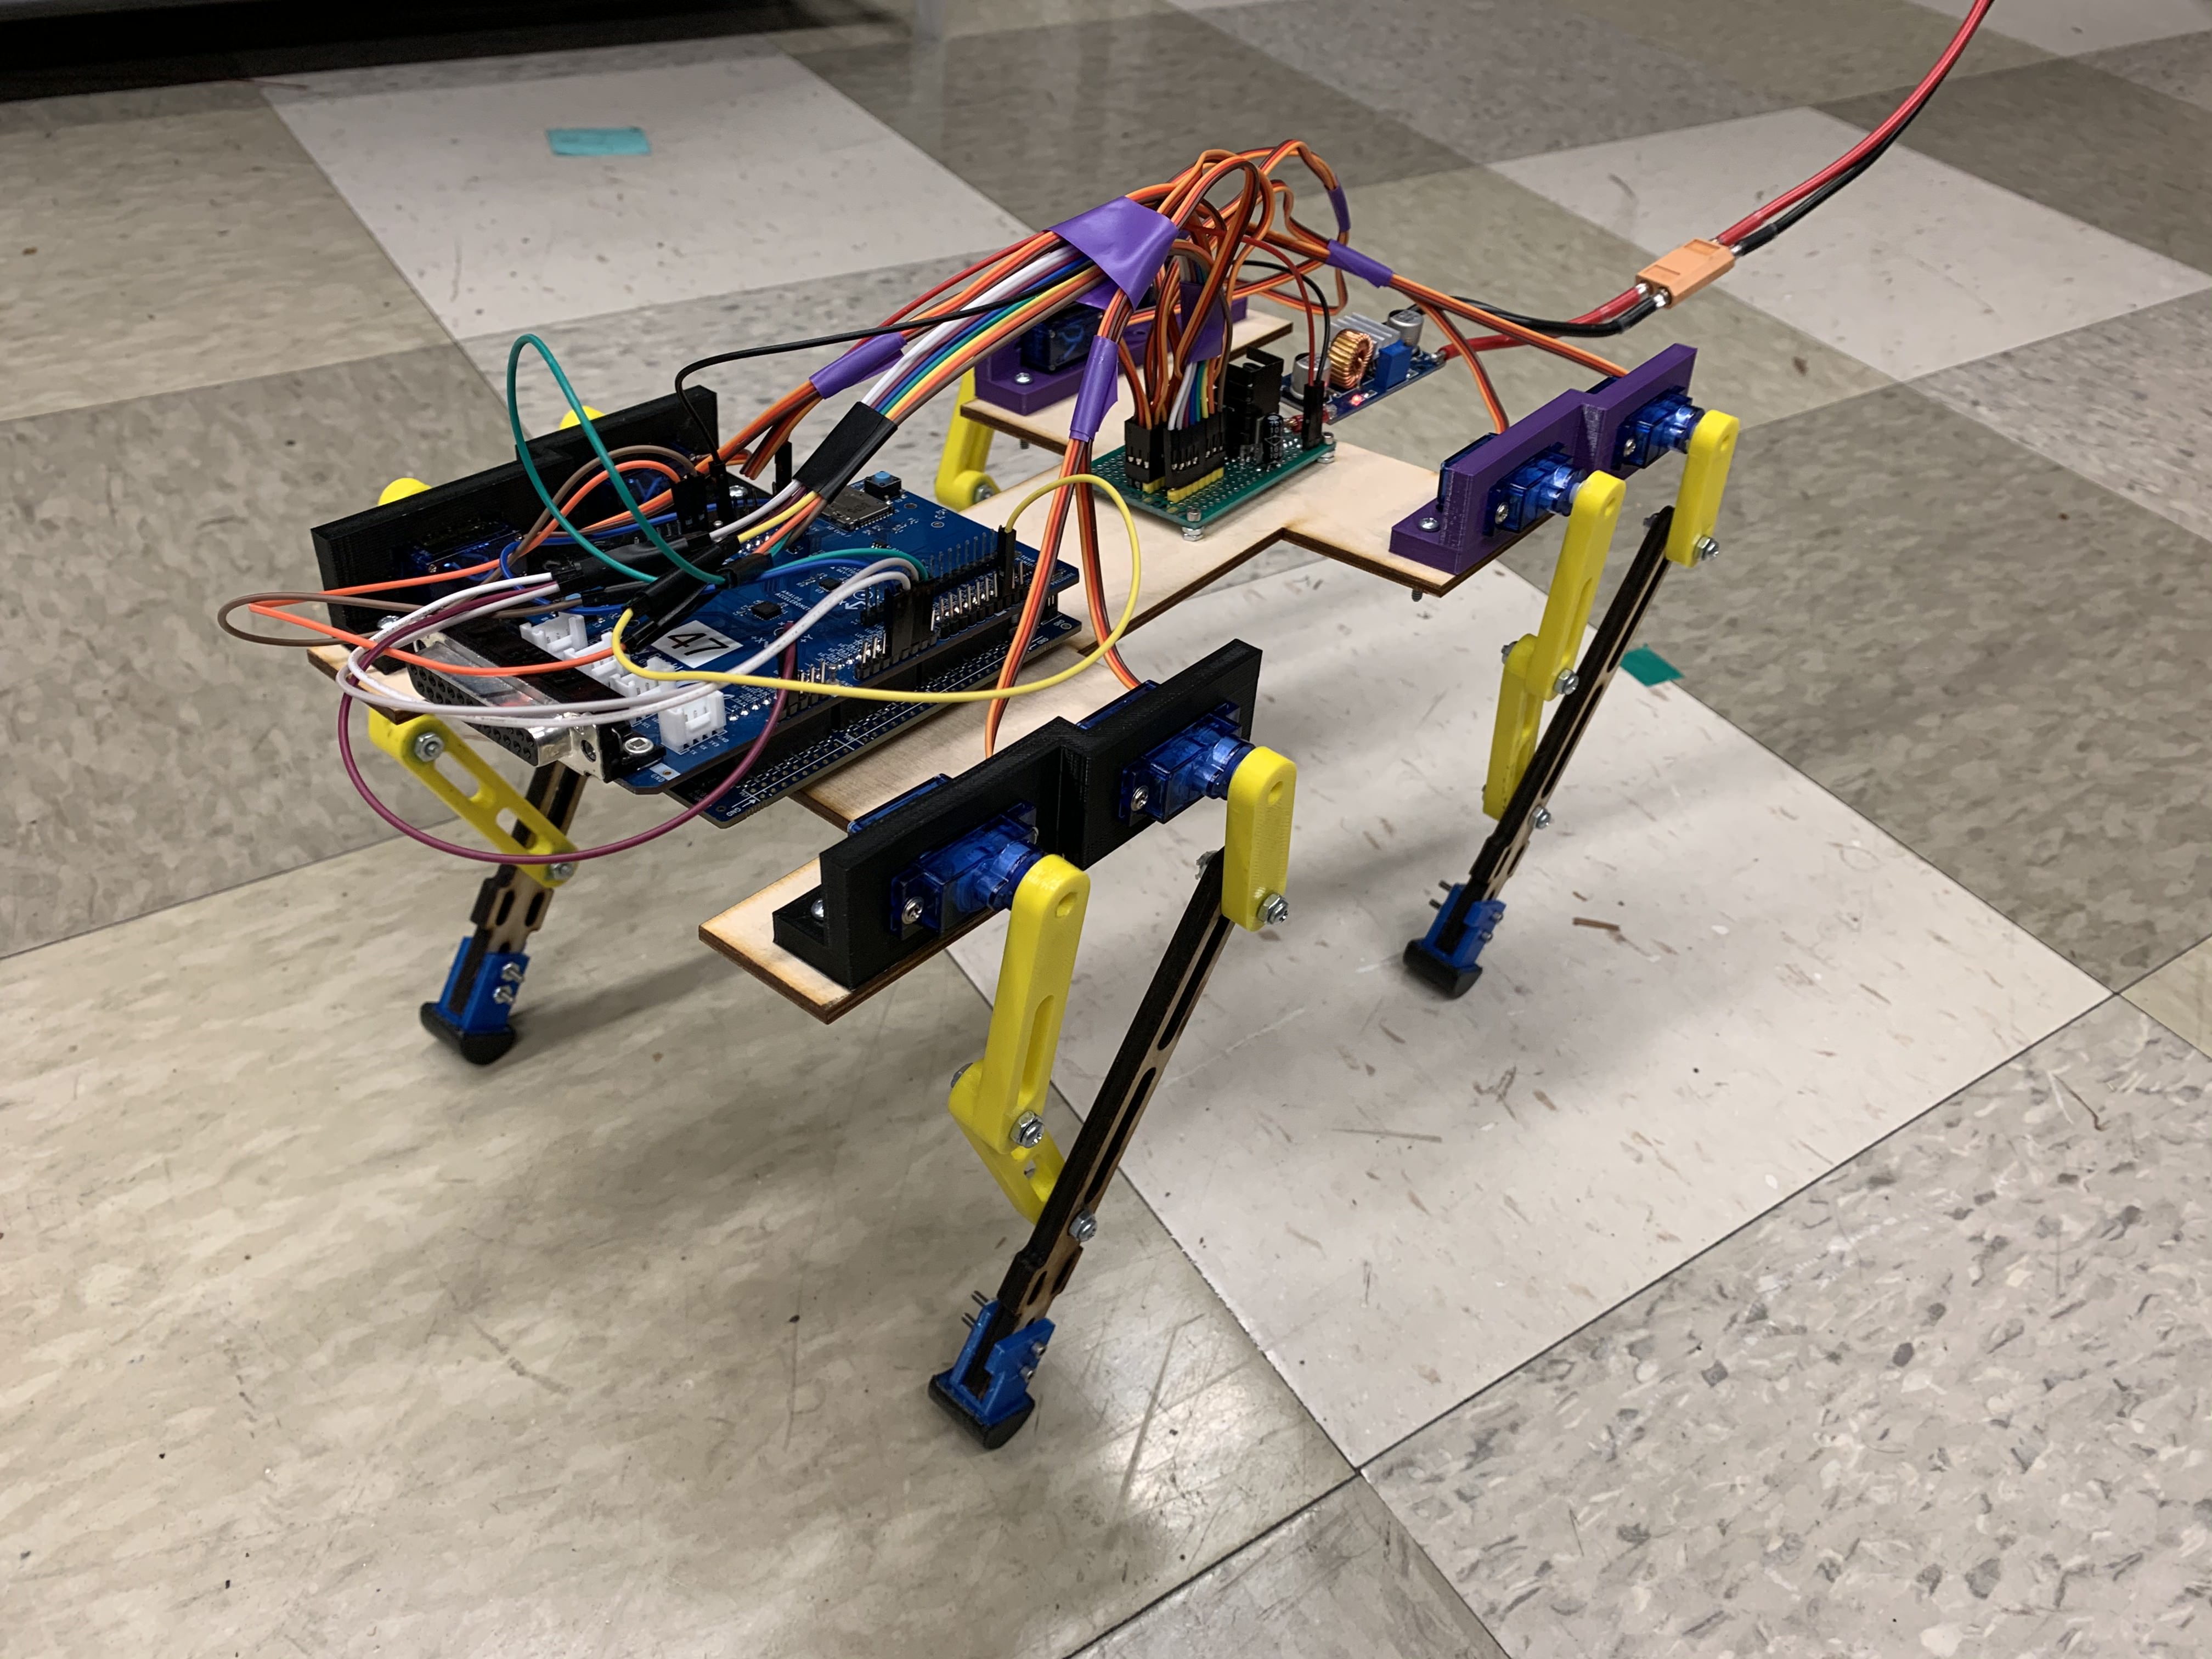 TART is a semi-autonomous quadrupedal robot that sends back environmental sensor data to operators via Bluetooth Low Energy (BLE). Robot motion is controlled with keypresses, which are sent over BLE to switch gaits.